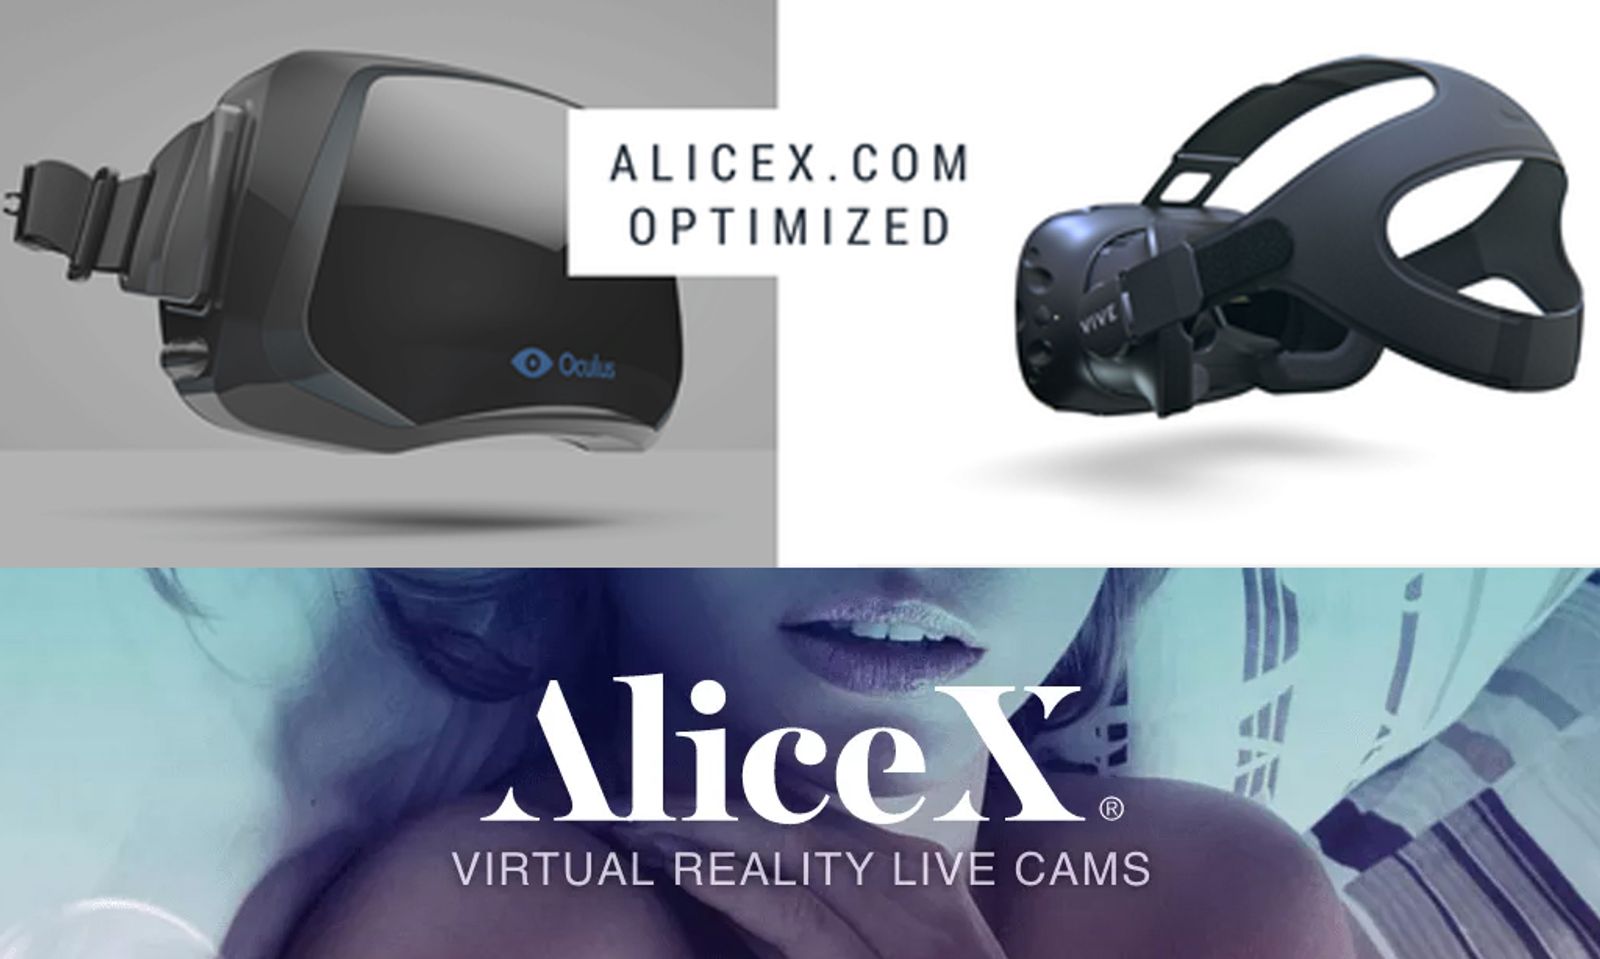 AliceX.com Content Now Optimized for Oculus Rift, Vive VR Headsets